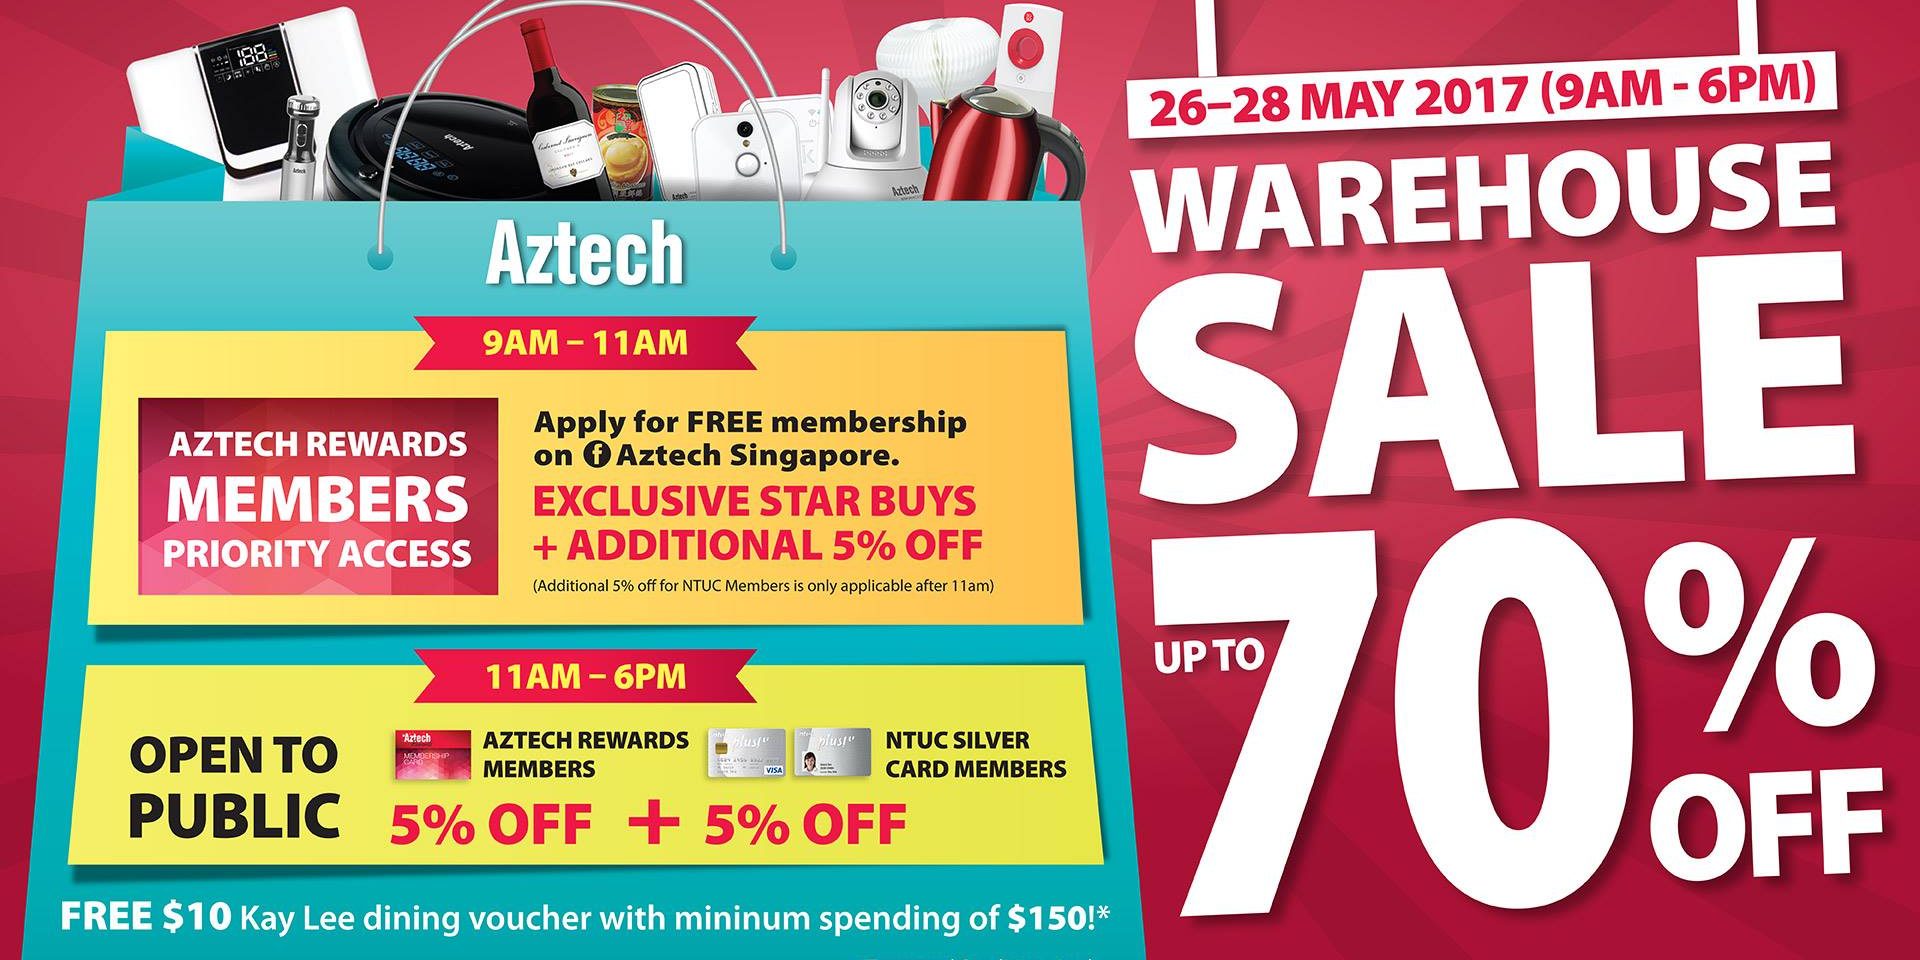 Aztech Singapore Warehouse Sale Up to 70% Off Promotion 26-28 May 2017